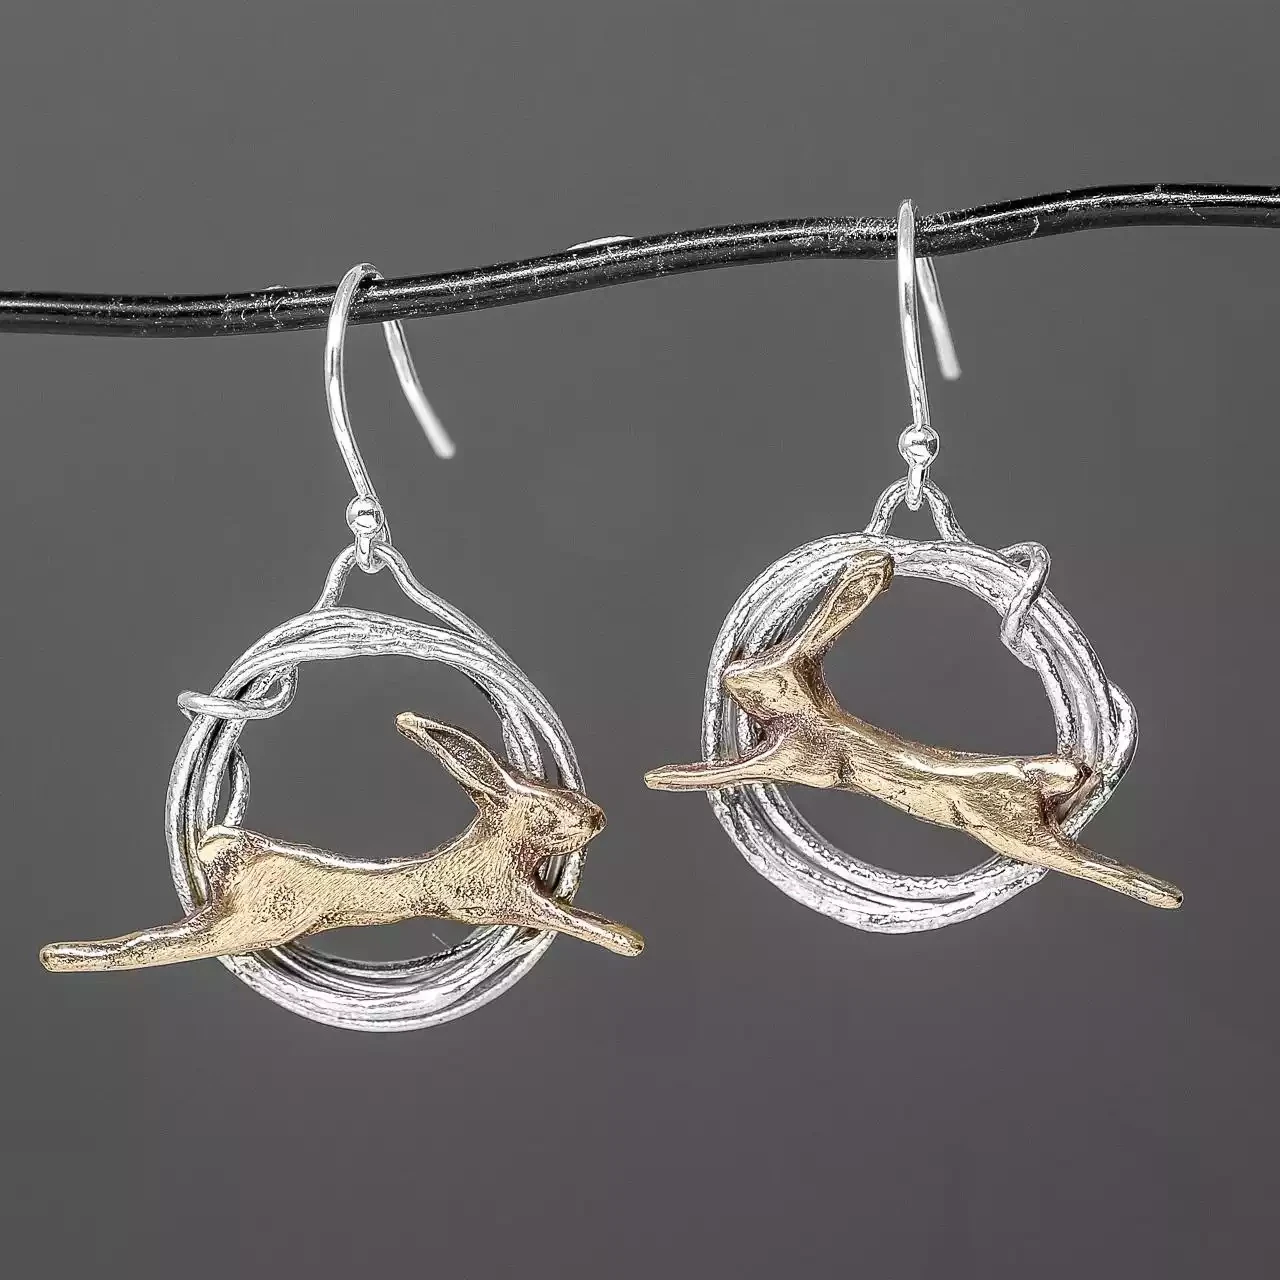 Hare in Hoop Silver and Bronze Earrings by Xuella Arnold